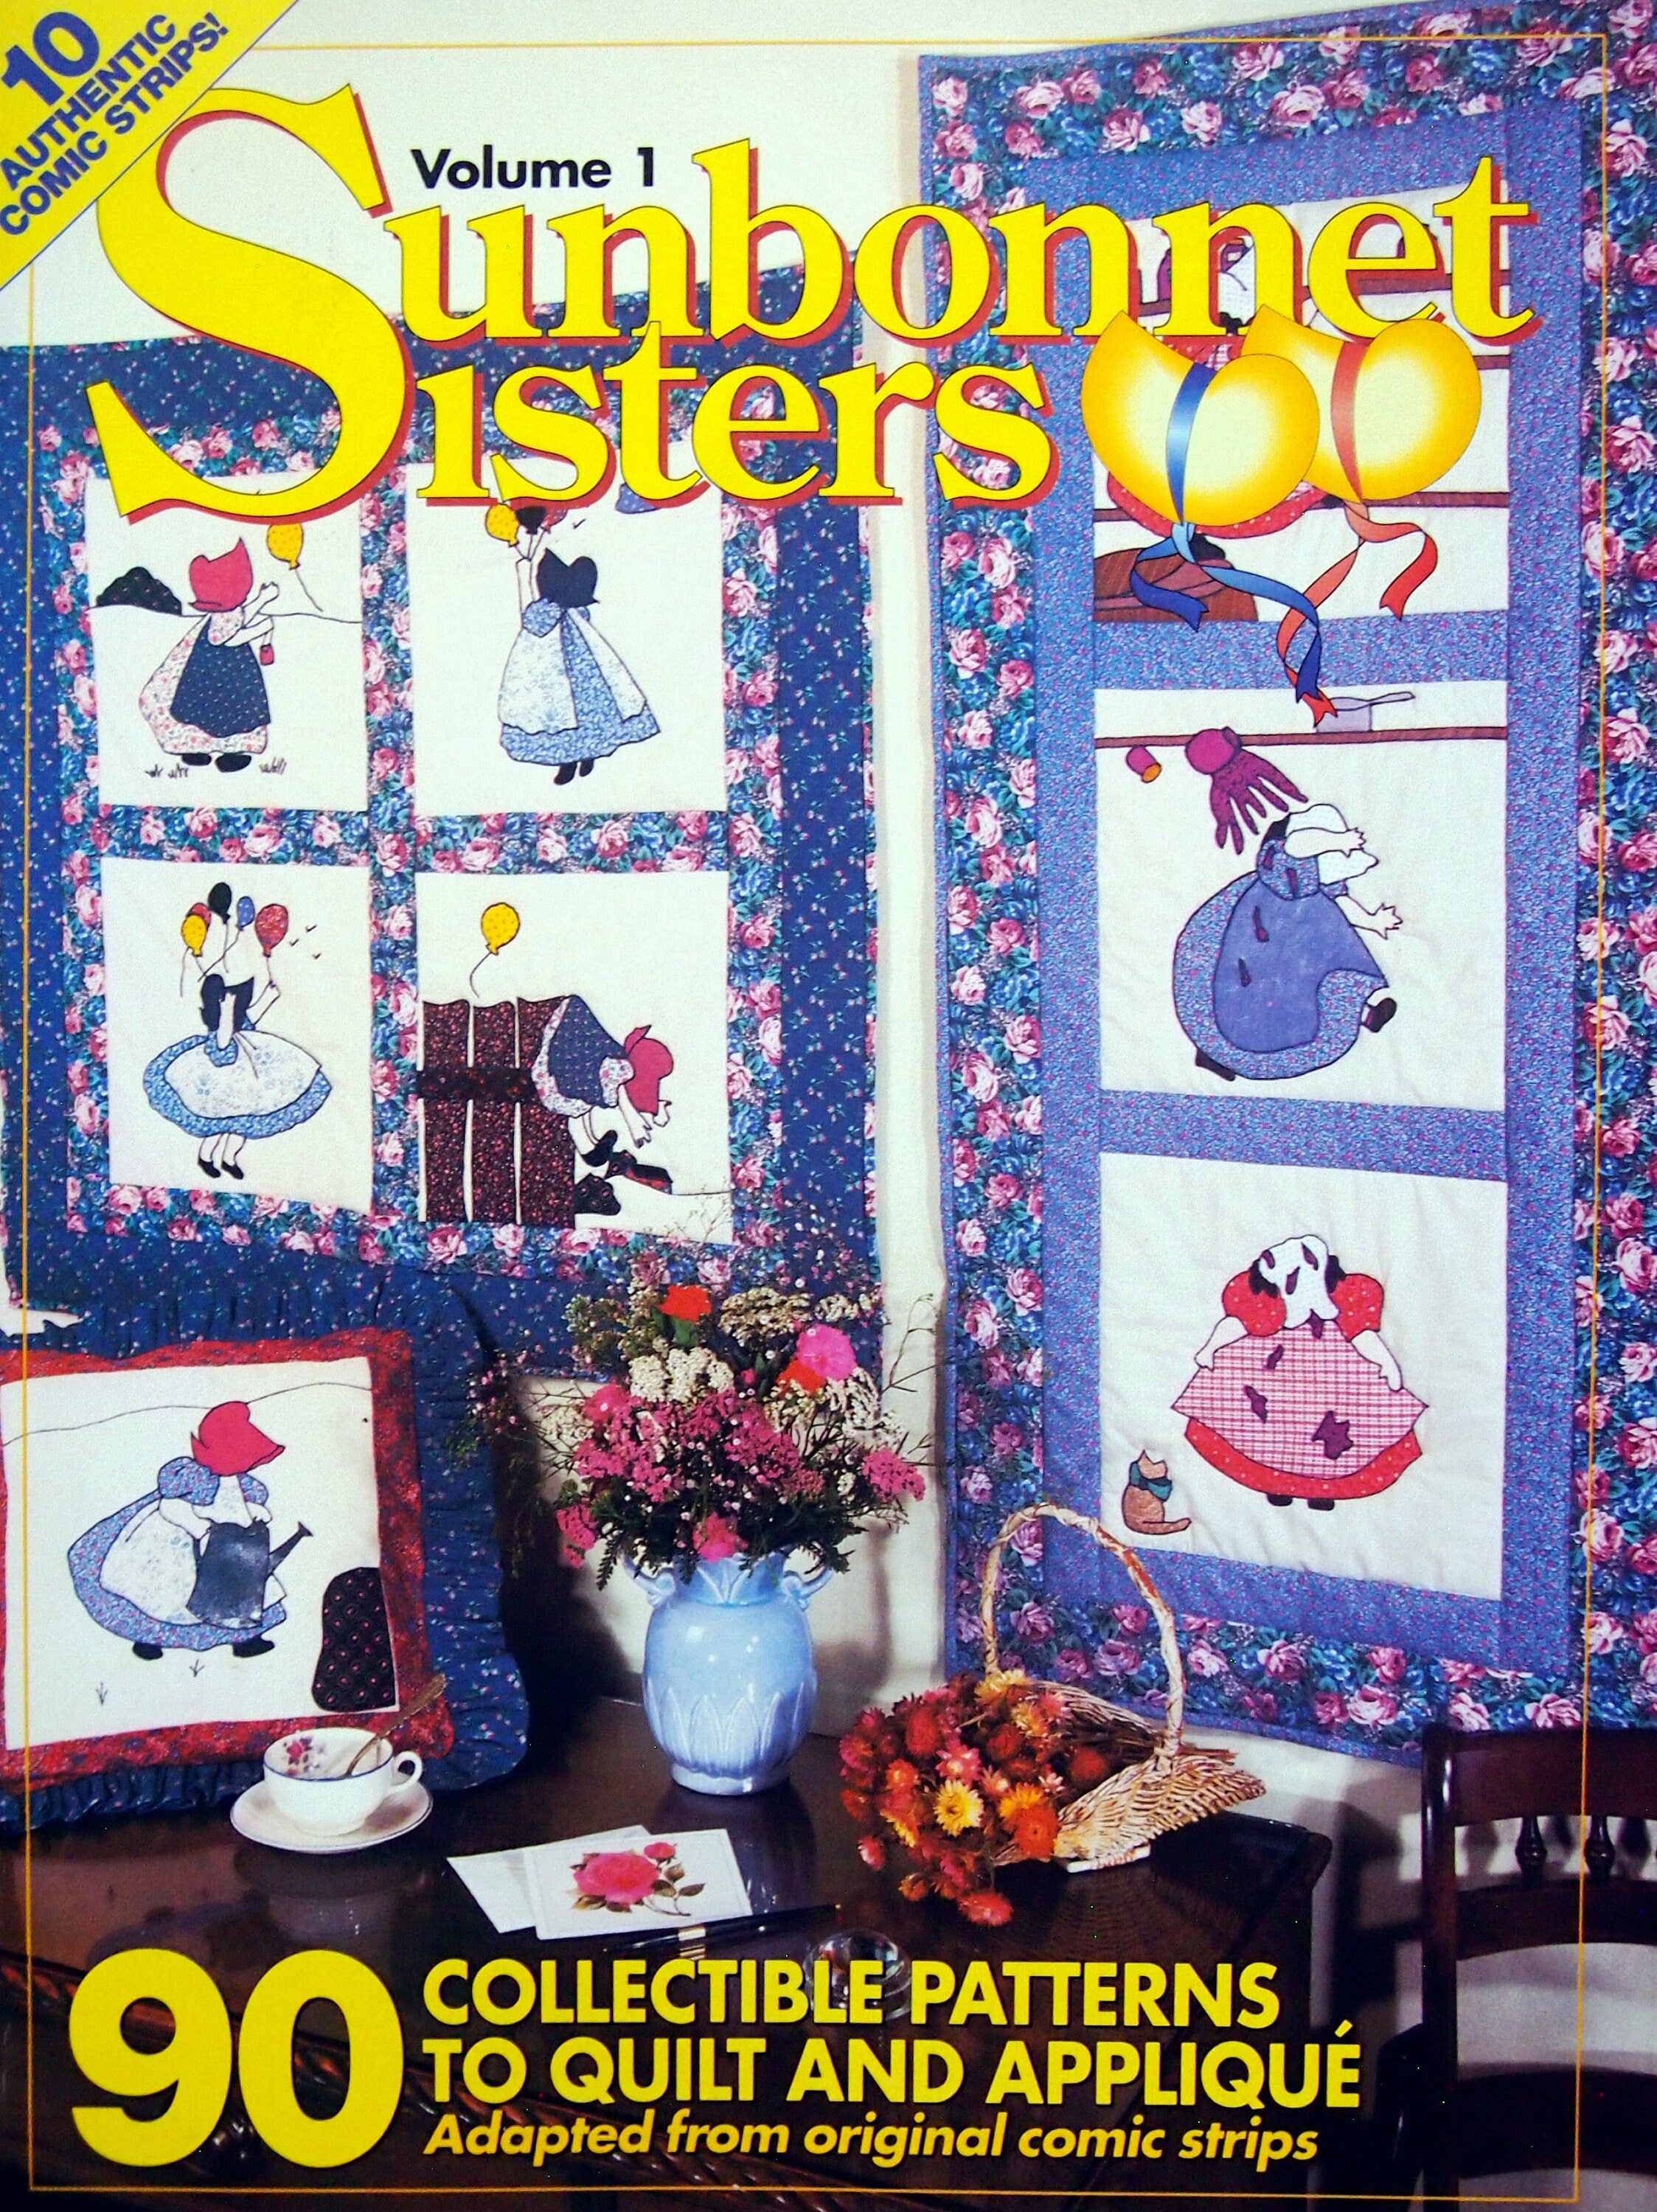 Sunbonnet Sisters Volume 1 90 Collectible Patterns to Quilt and